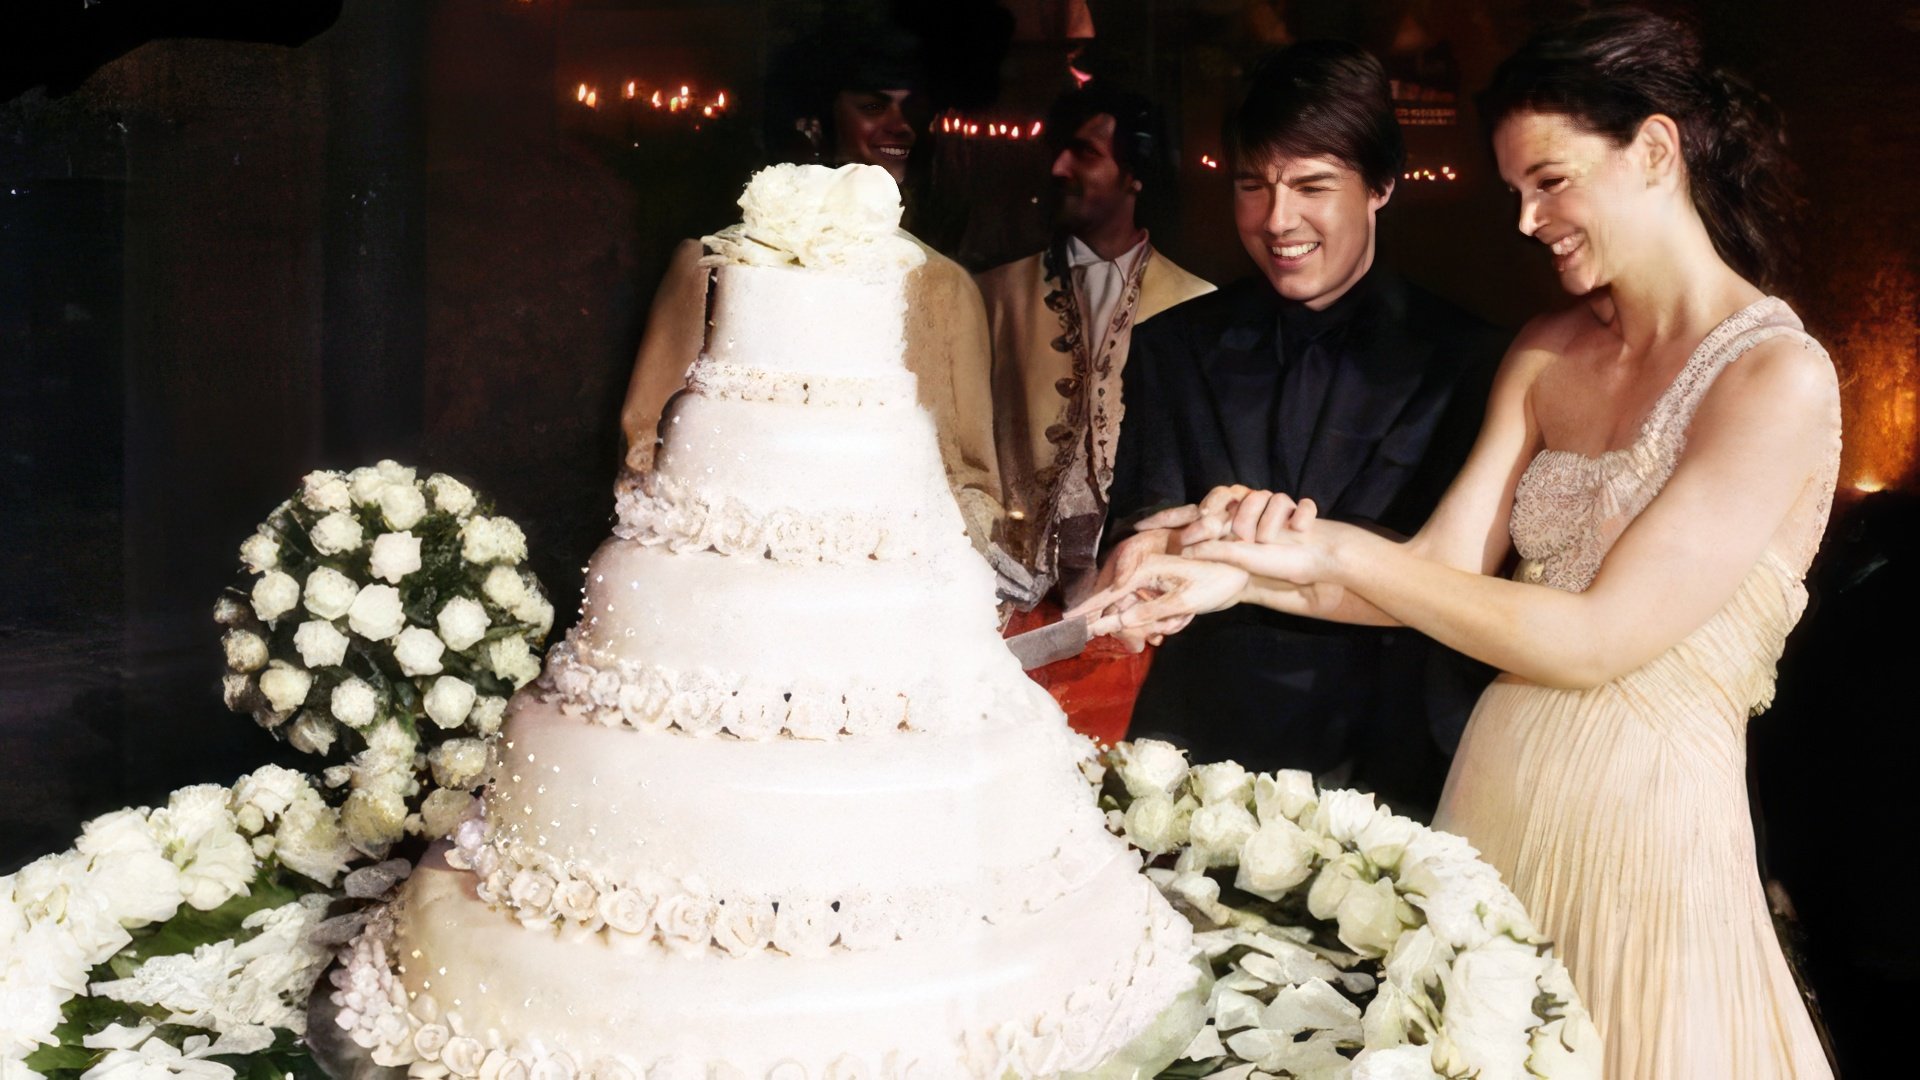 Katie Holmes and Tom Cruise’s wedding photo